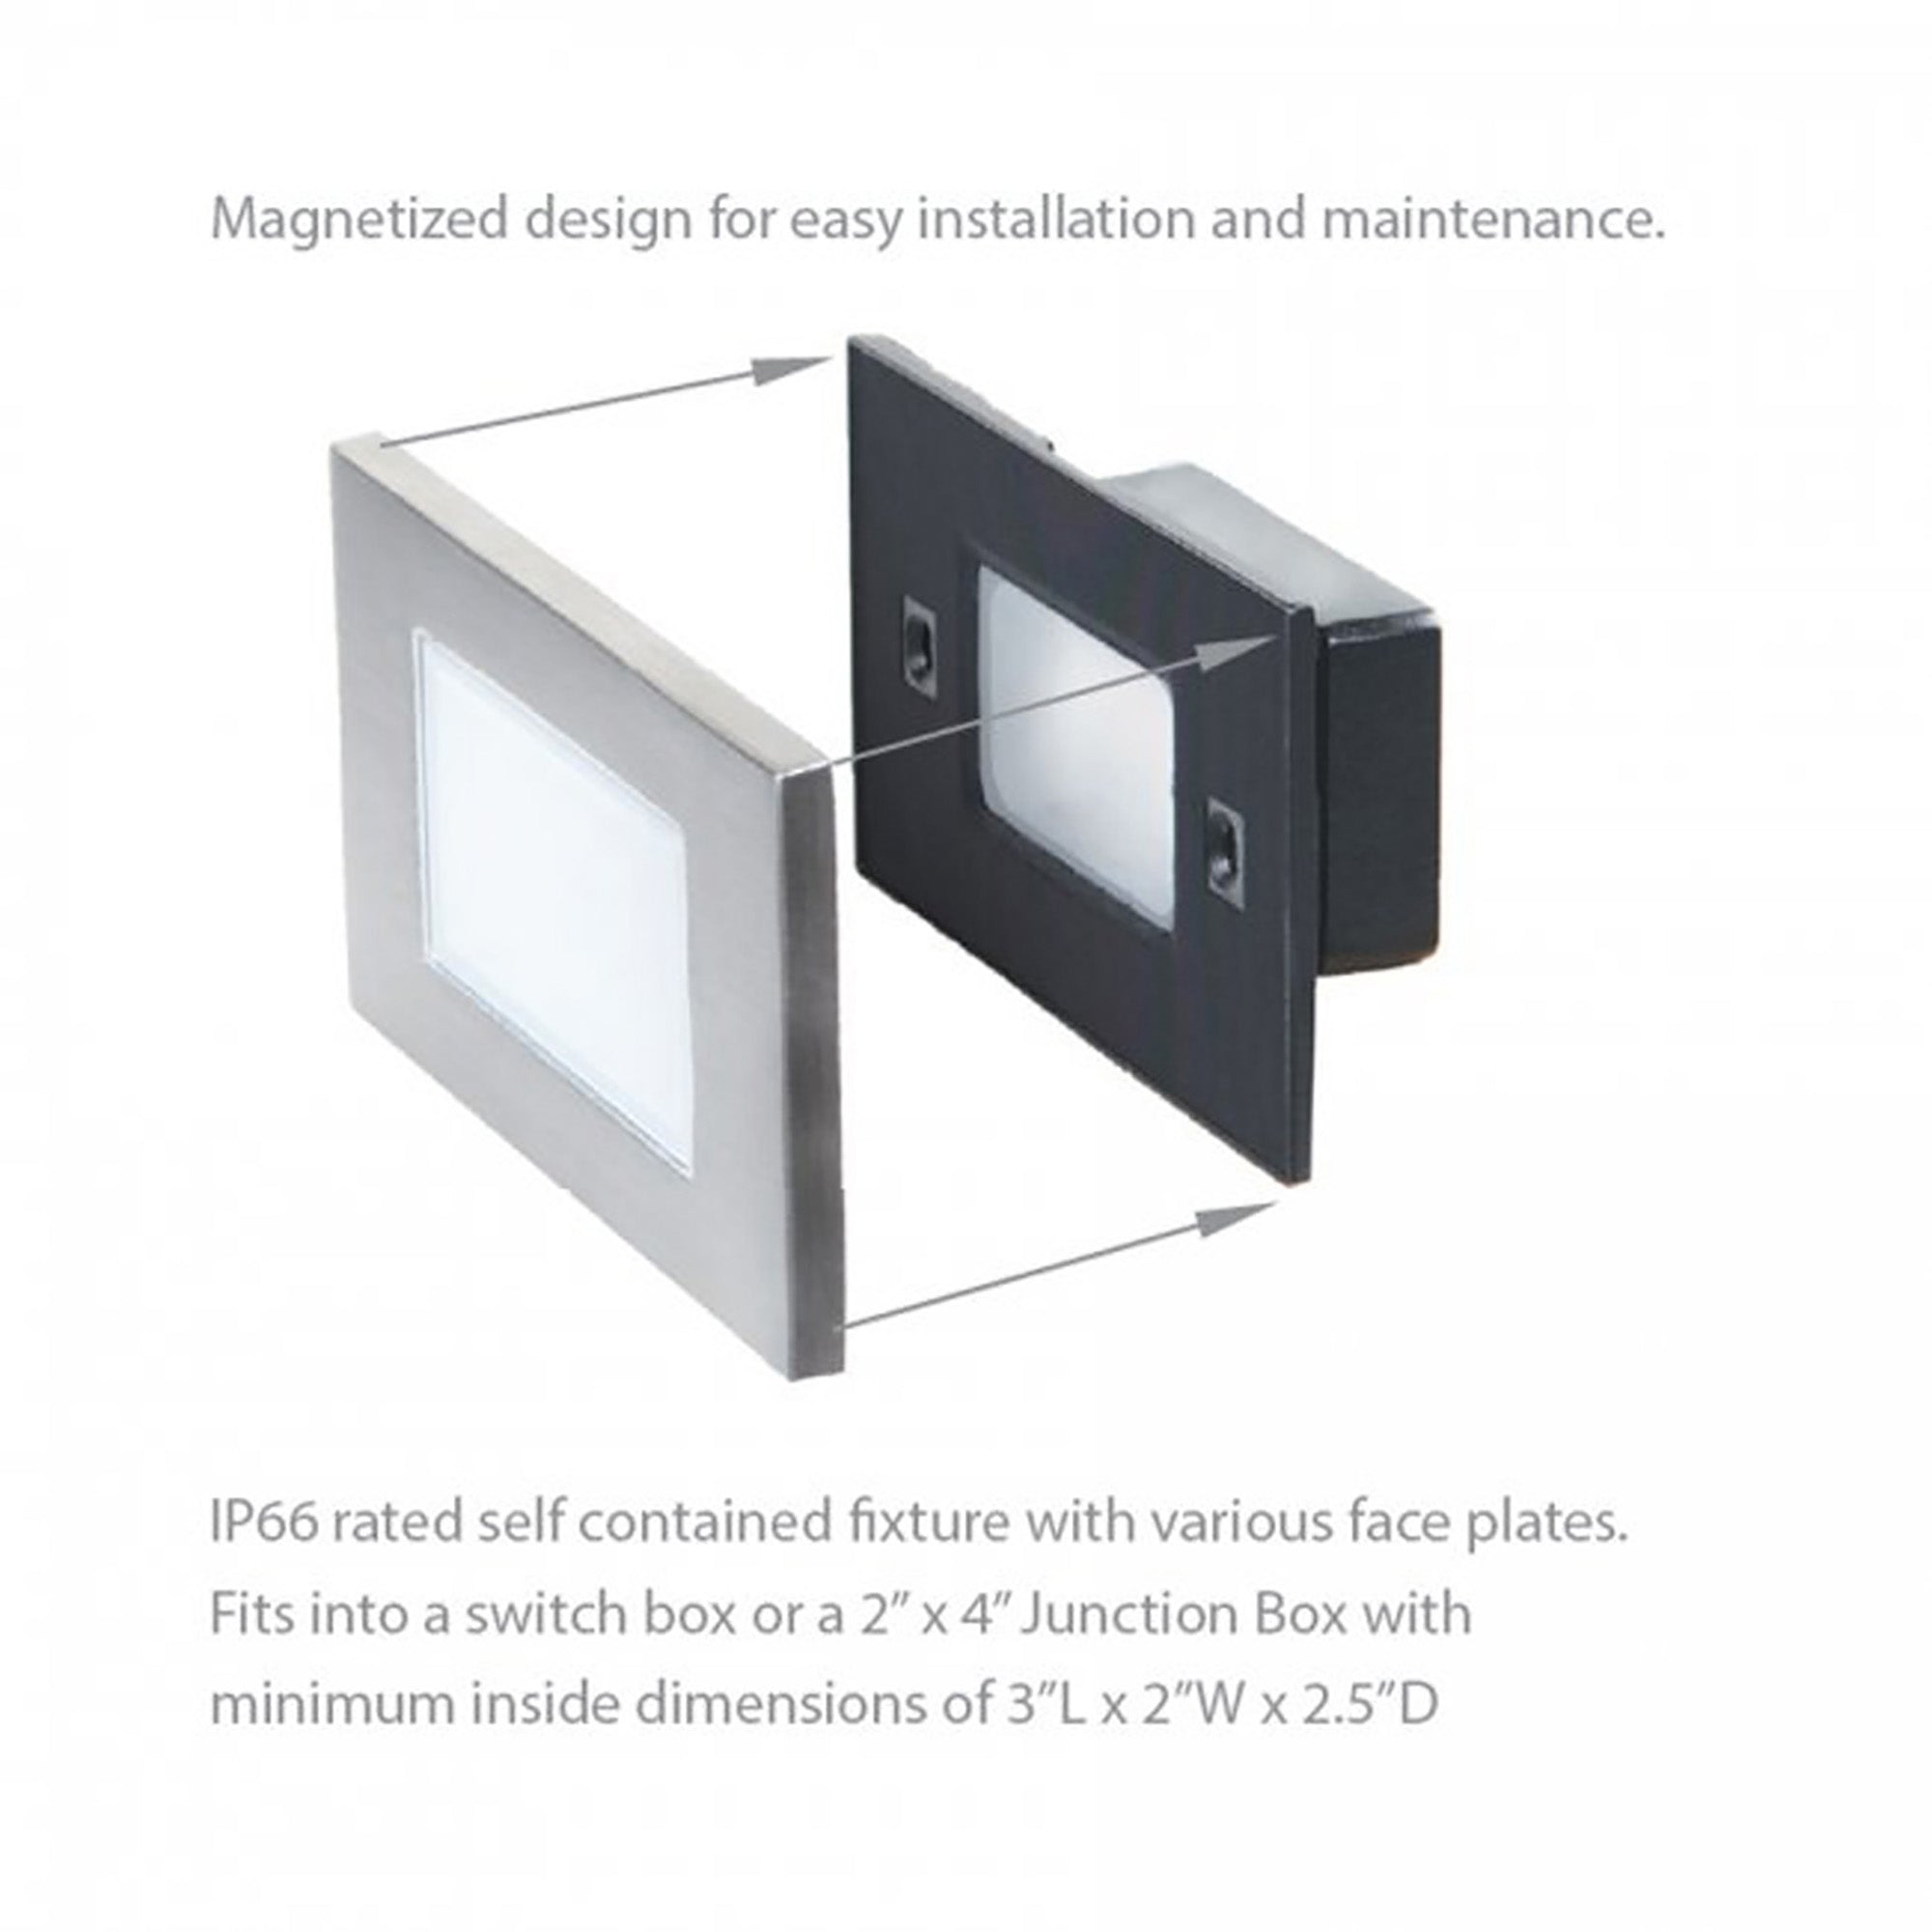 LED 12V Diffused Indoor/Outdoor Step and Wall Light